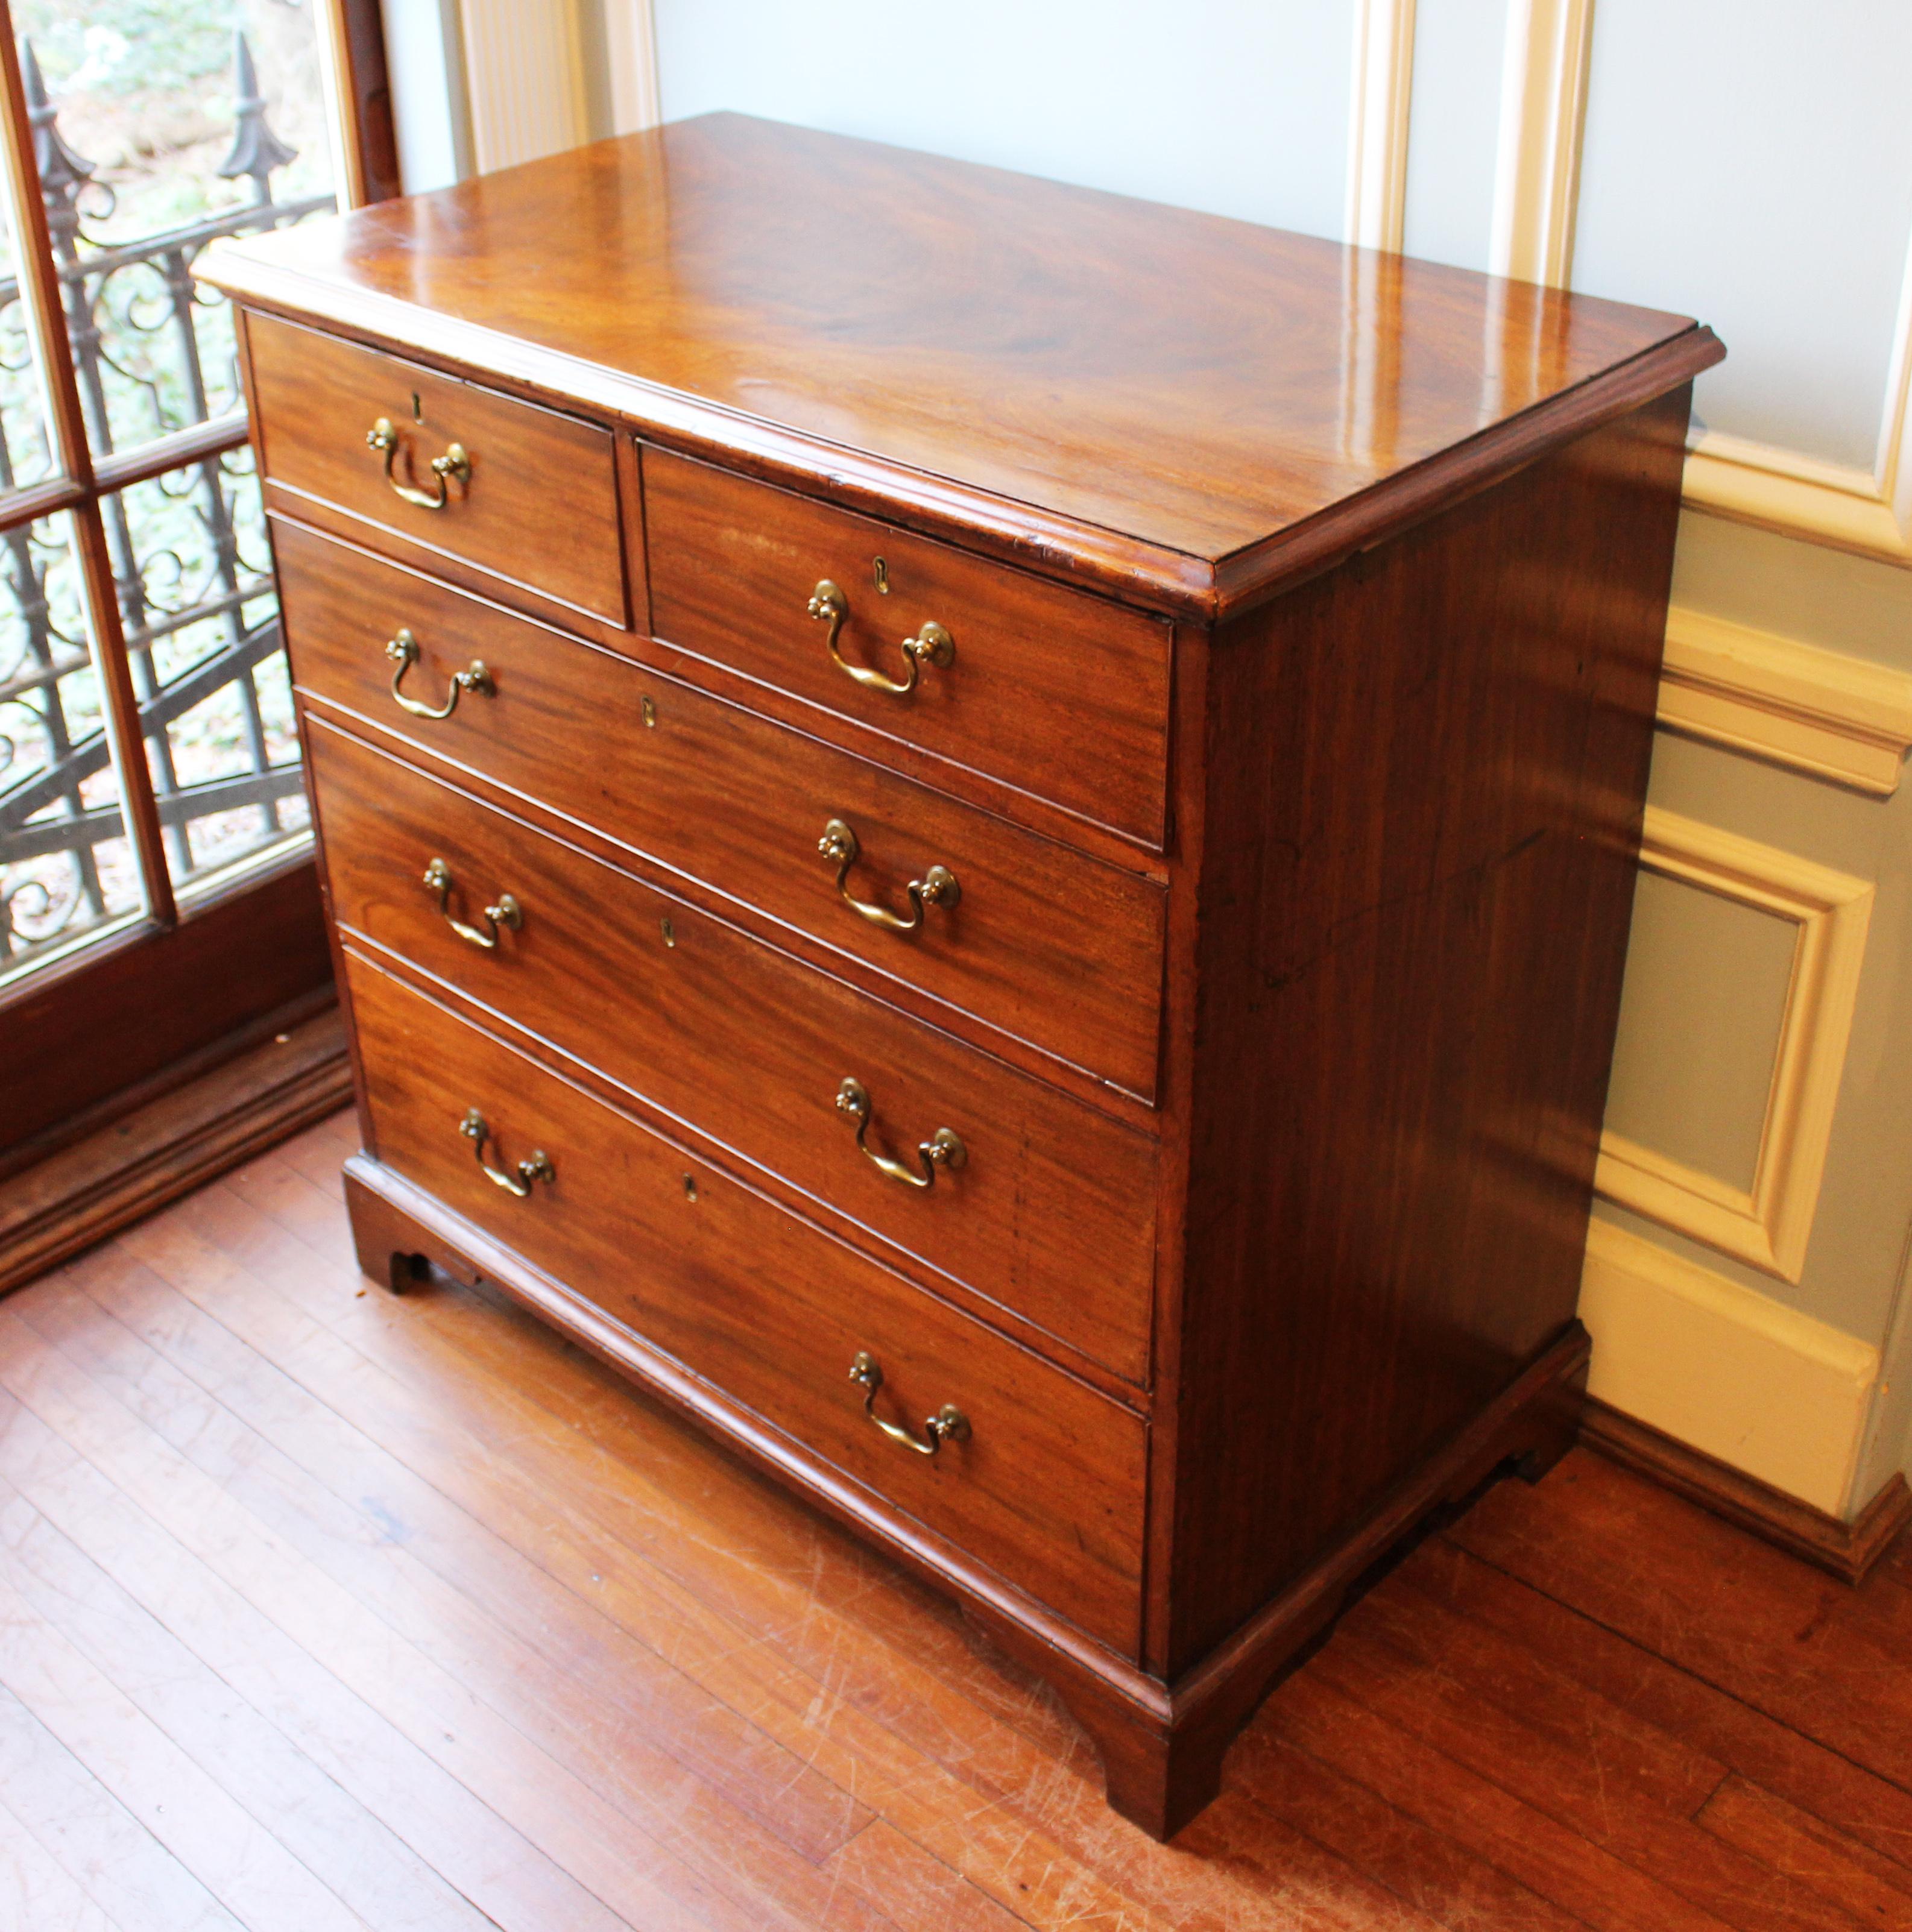 Late 18th century Georgian chest of drawers, 2 short over 3 long graduated drawers with bail and rosette handles. Raised on shaped, bracket feet. Well molded top. Mahogany primary wood with oak and pine secondary. English, George III period and